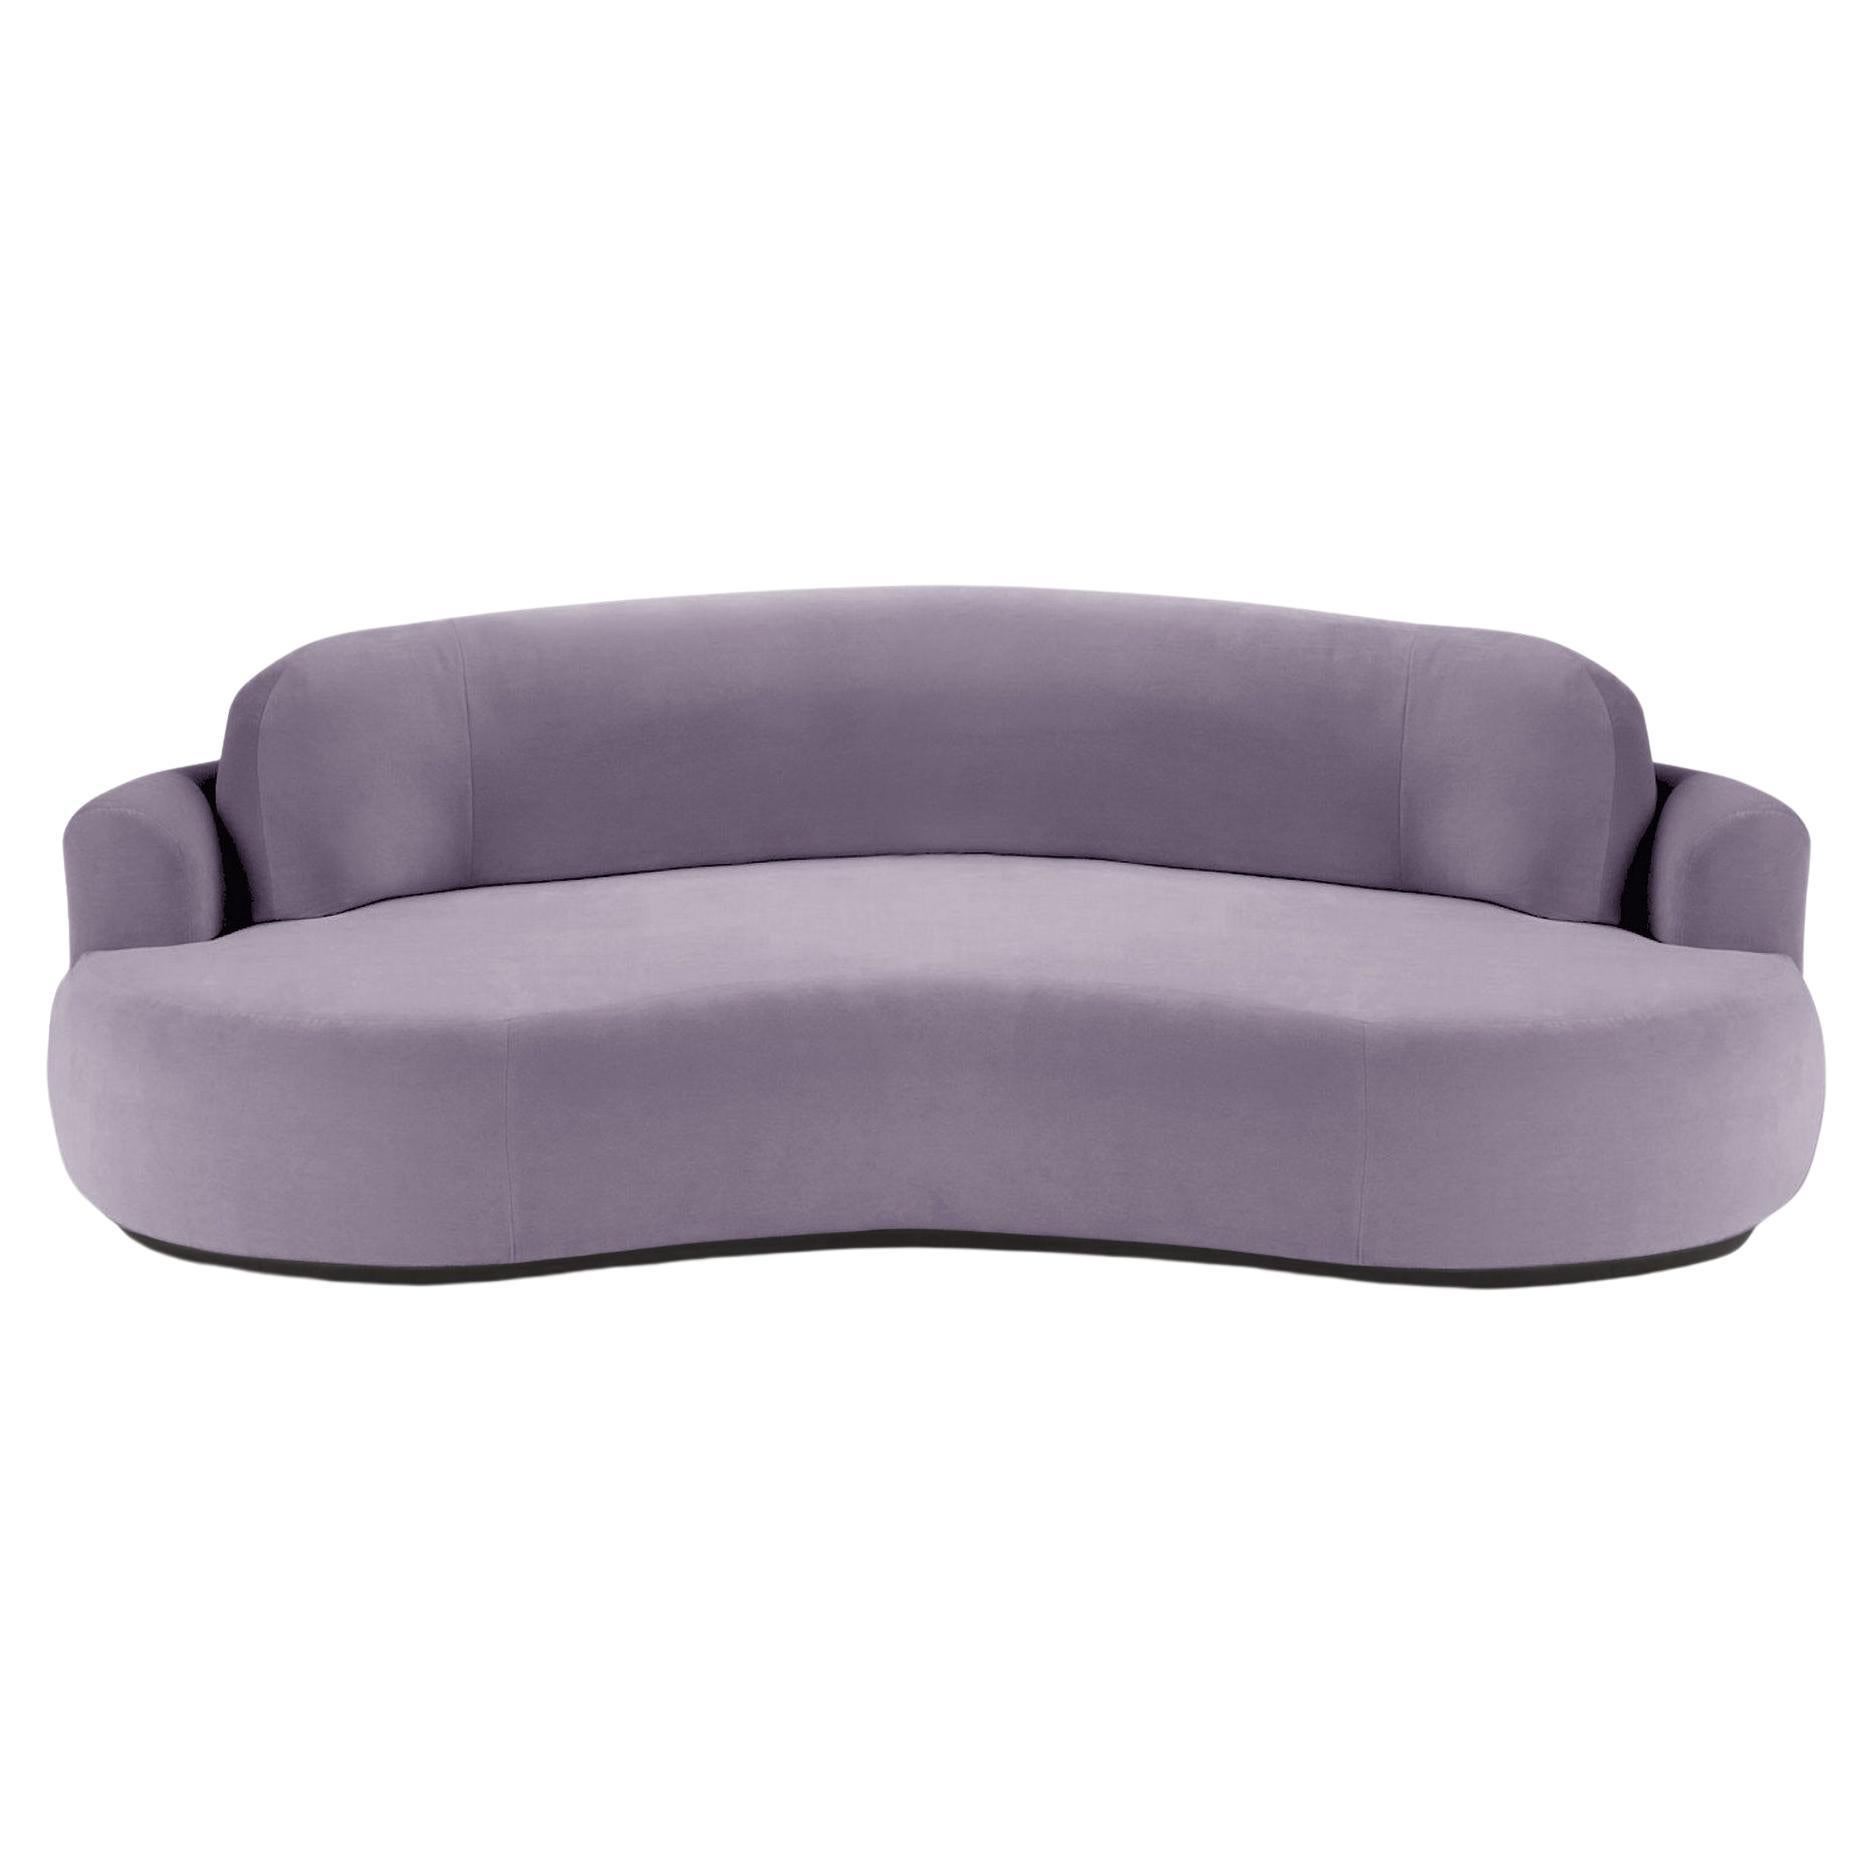 Naked Round Sofa, Large with Beech Ash-056-5 and Paris Lavanda For Sale